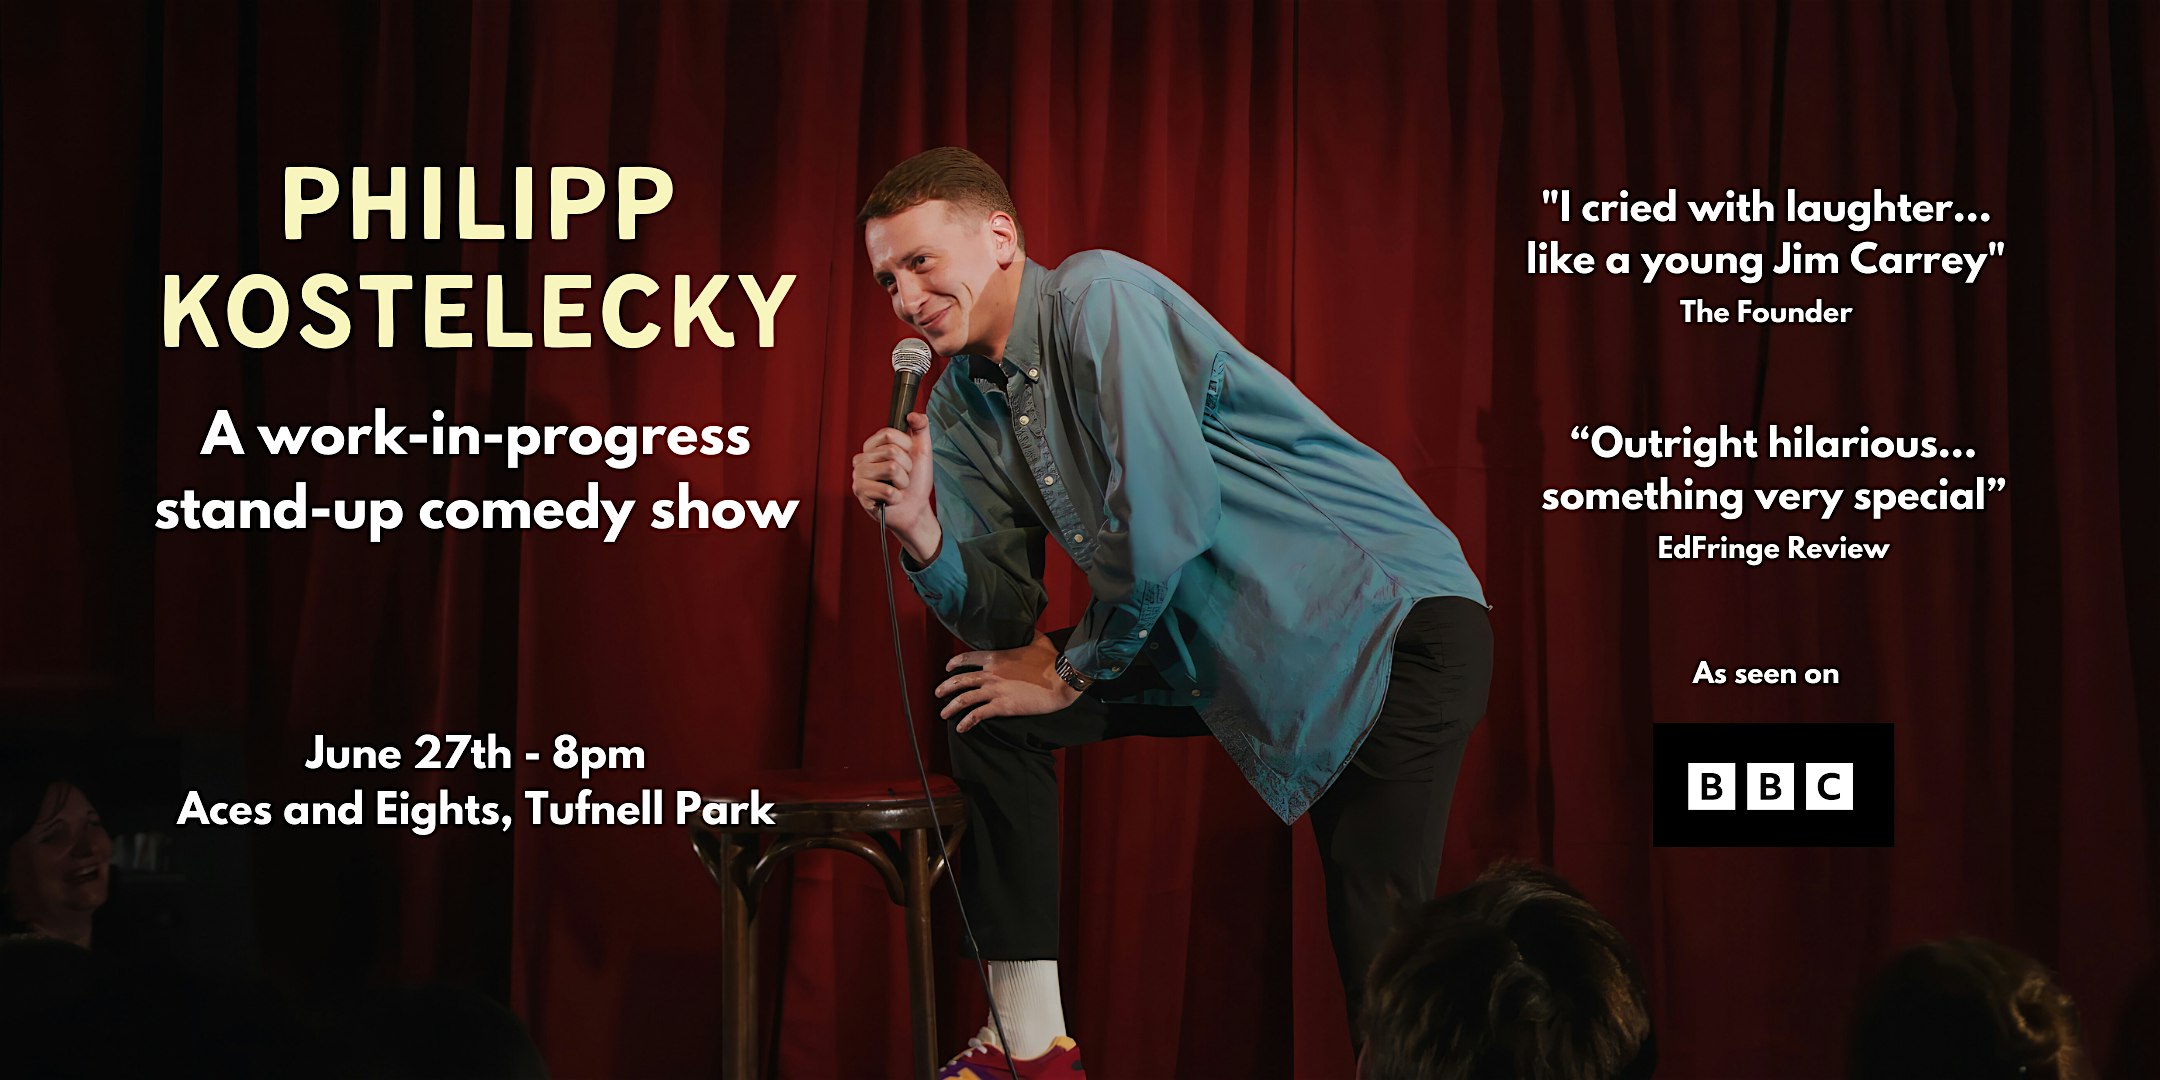 Philipp Kostelecky: A Stand-up Comedy Show (work-in-progress)